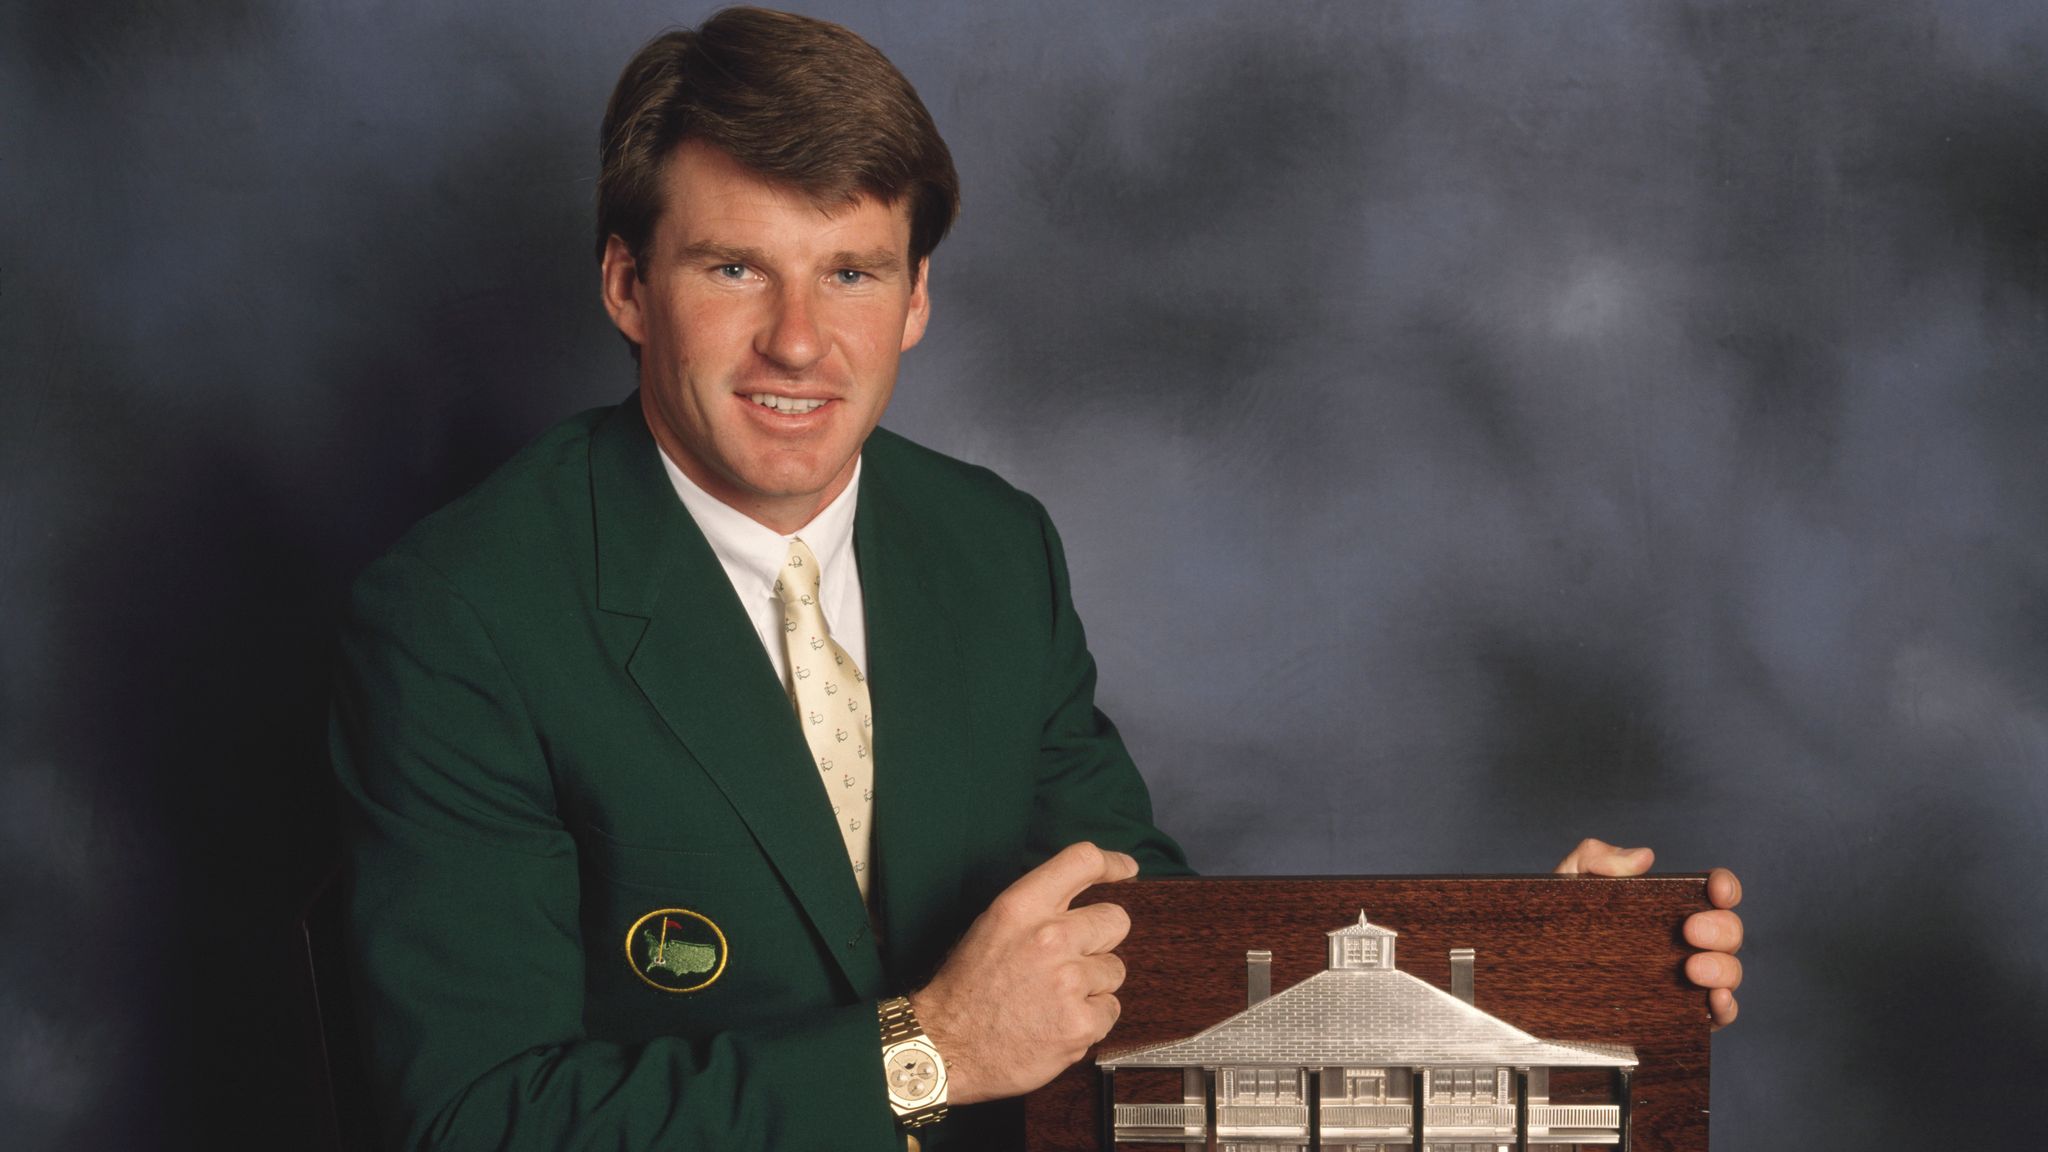 The Masters Sir Nick Faldo becomes just the second man to retain the title with 1990 victory Golf News Sky Sports